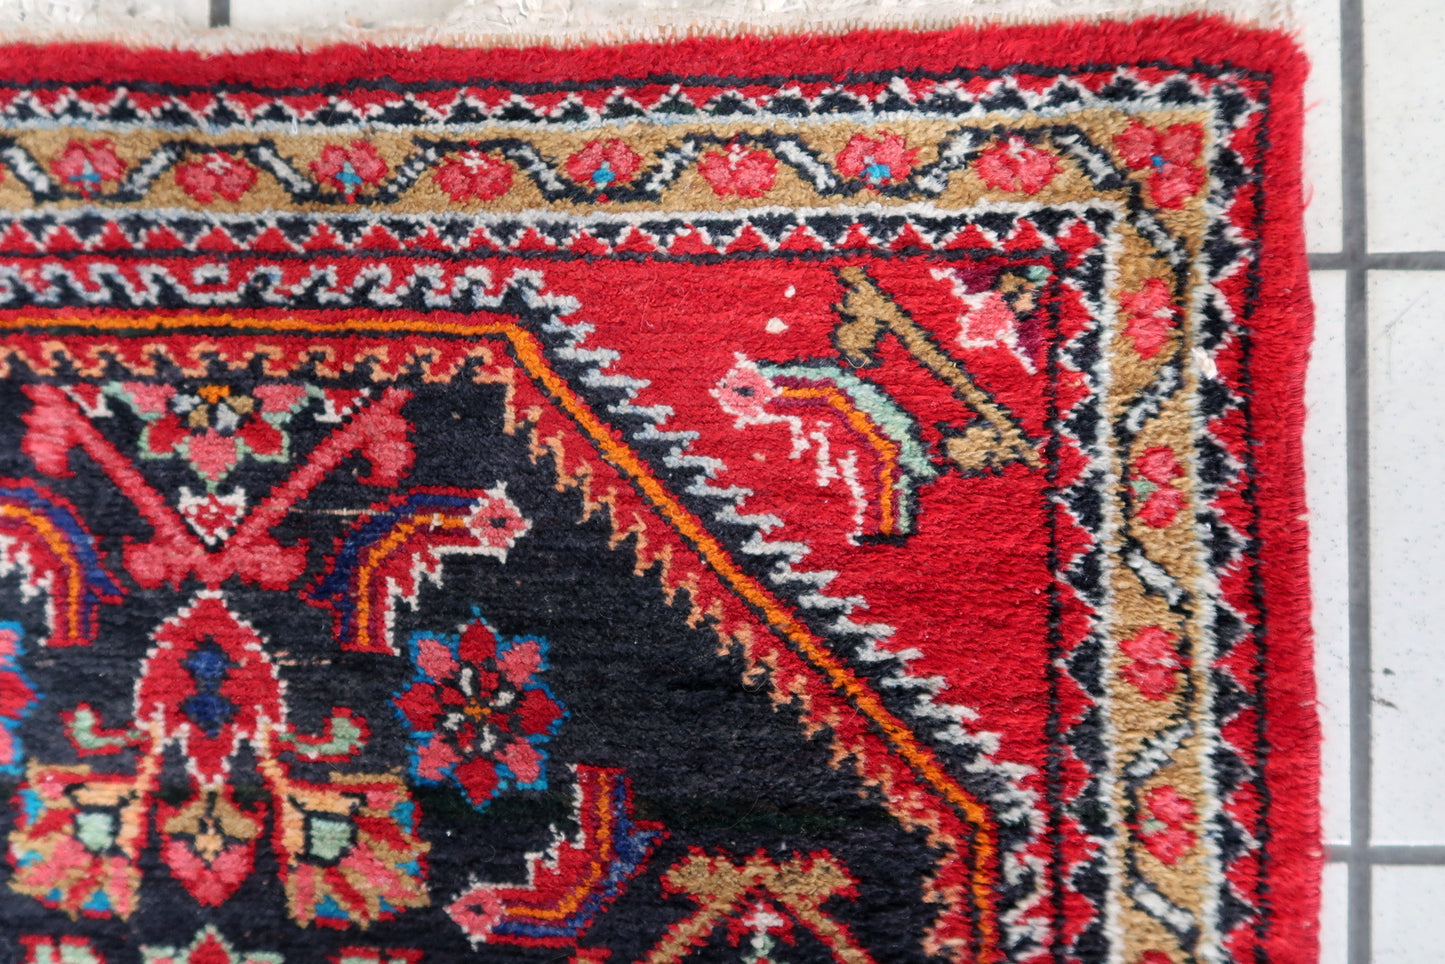 Close-up of vintage charm on Handmade Vintage Persian Hamadan Rug - Detailed view showcasing the rug's vintage appeal.